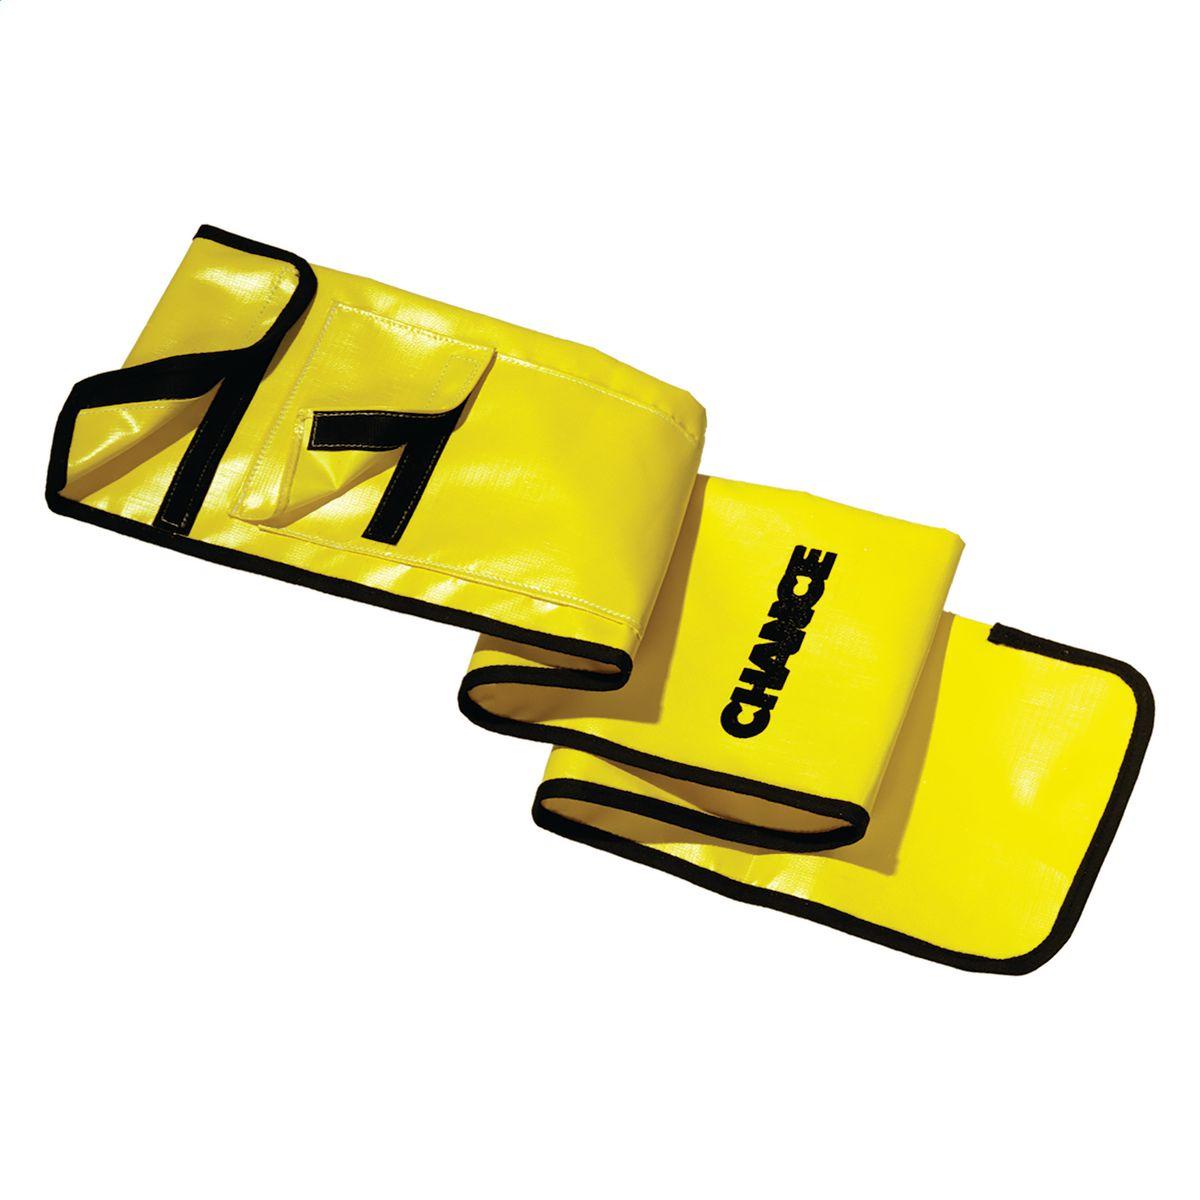 Hubbell P6432 Chance waterproof storage bags help guard against contaminants and abrasion to help maintain the insulating properties of hotline tools. Yellow heavy-duty vinyl-impregnated fabric lasts for years of rugged service. Snaps, Velcro� closures and custom-tailo